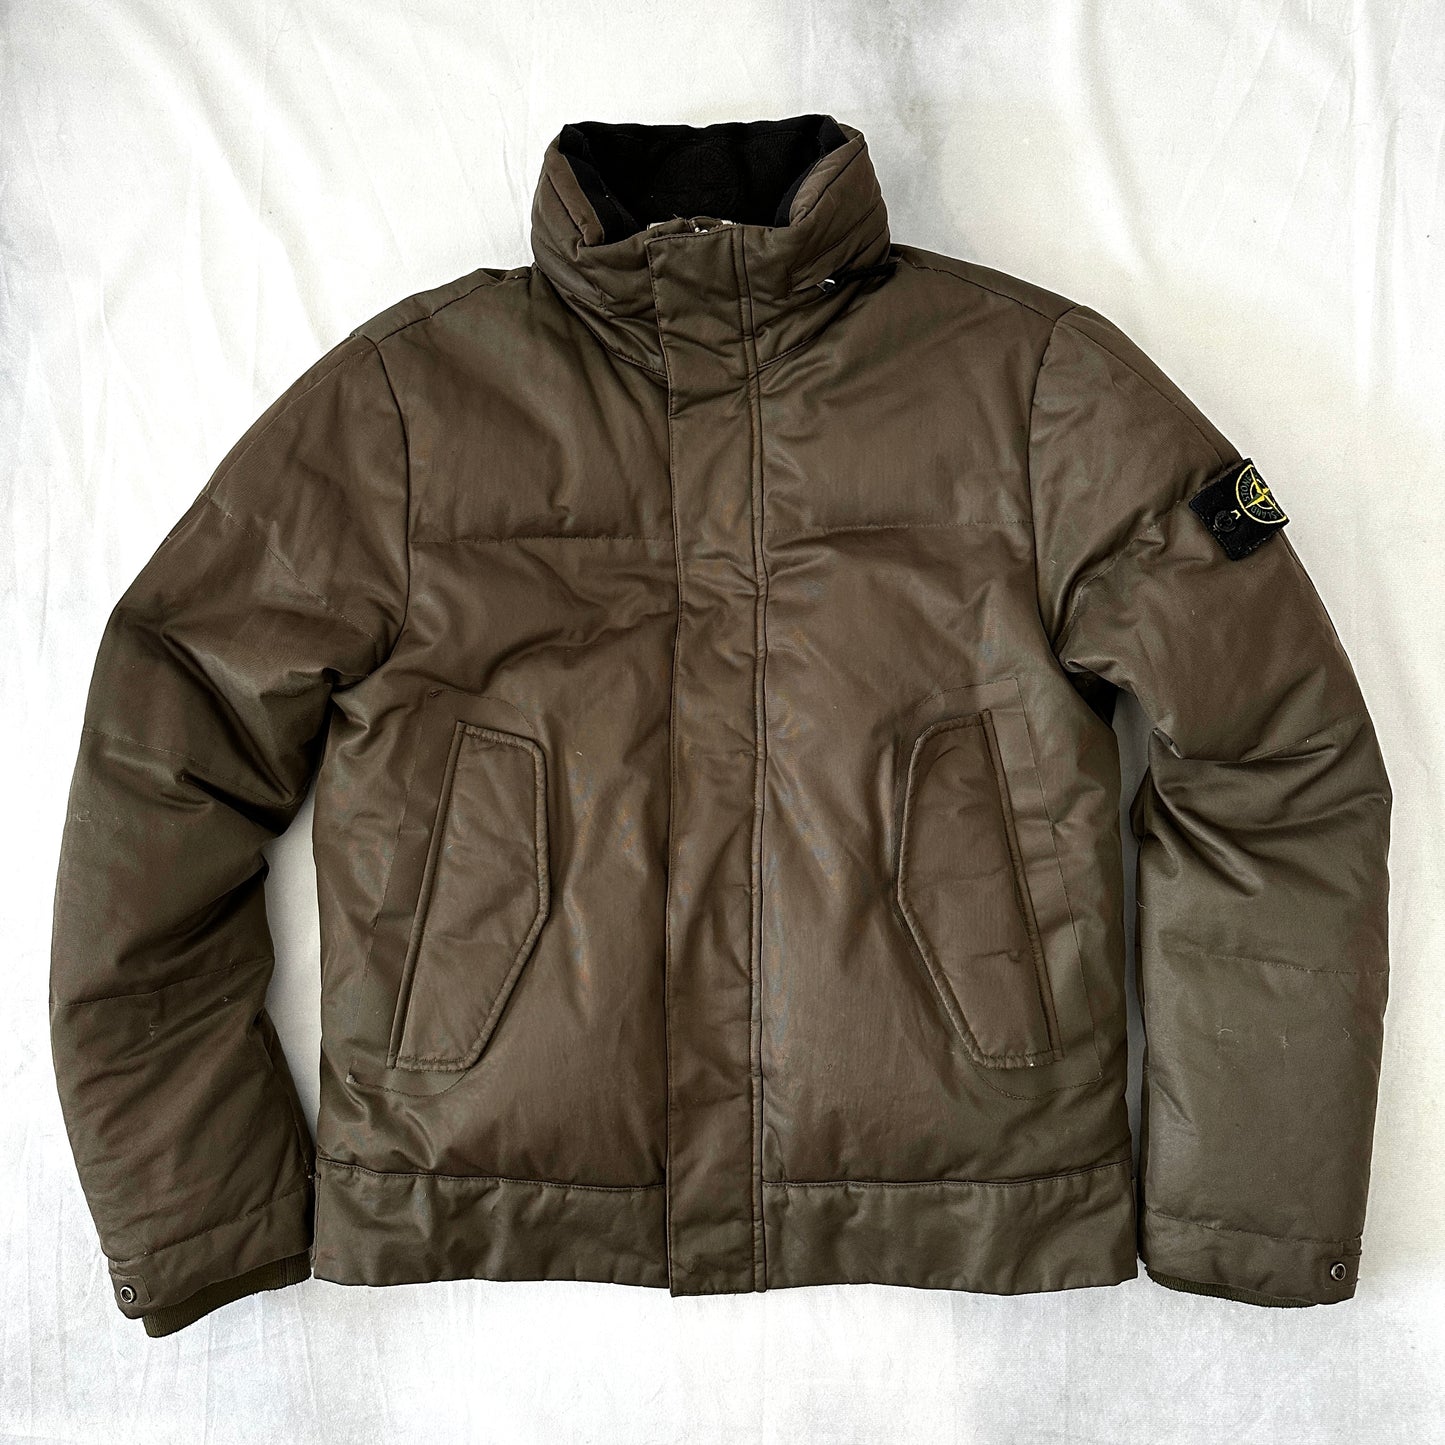 Stone Island 2009 Weatherproof Down Jacket - L - Made in Italy